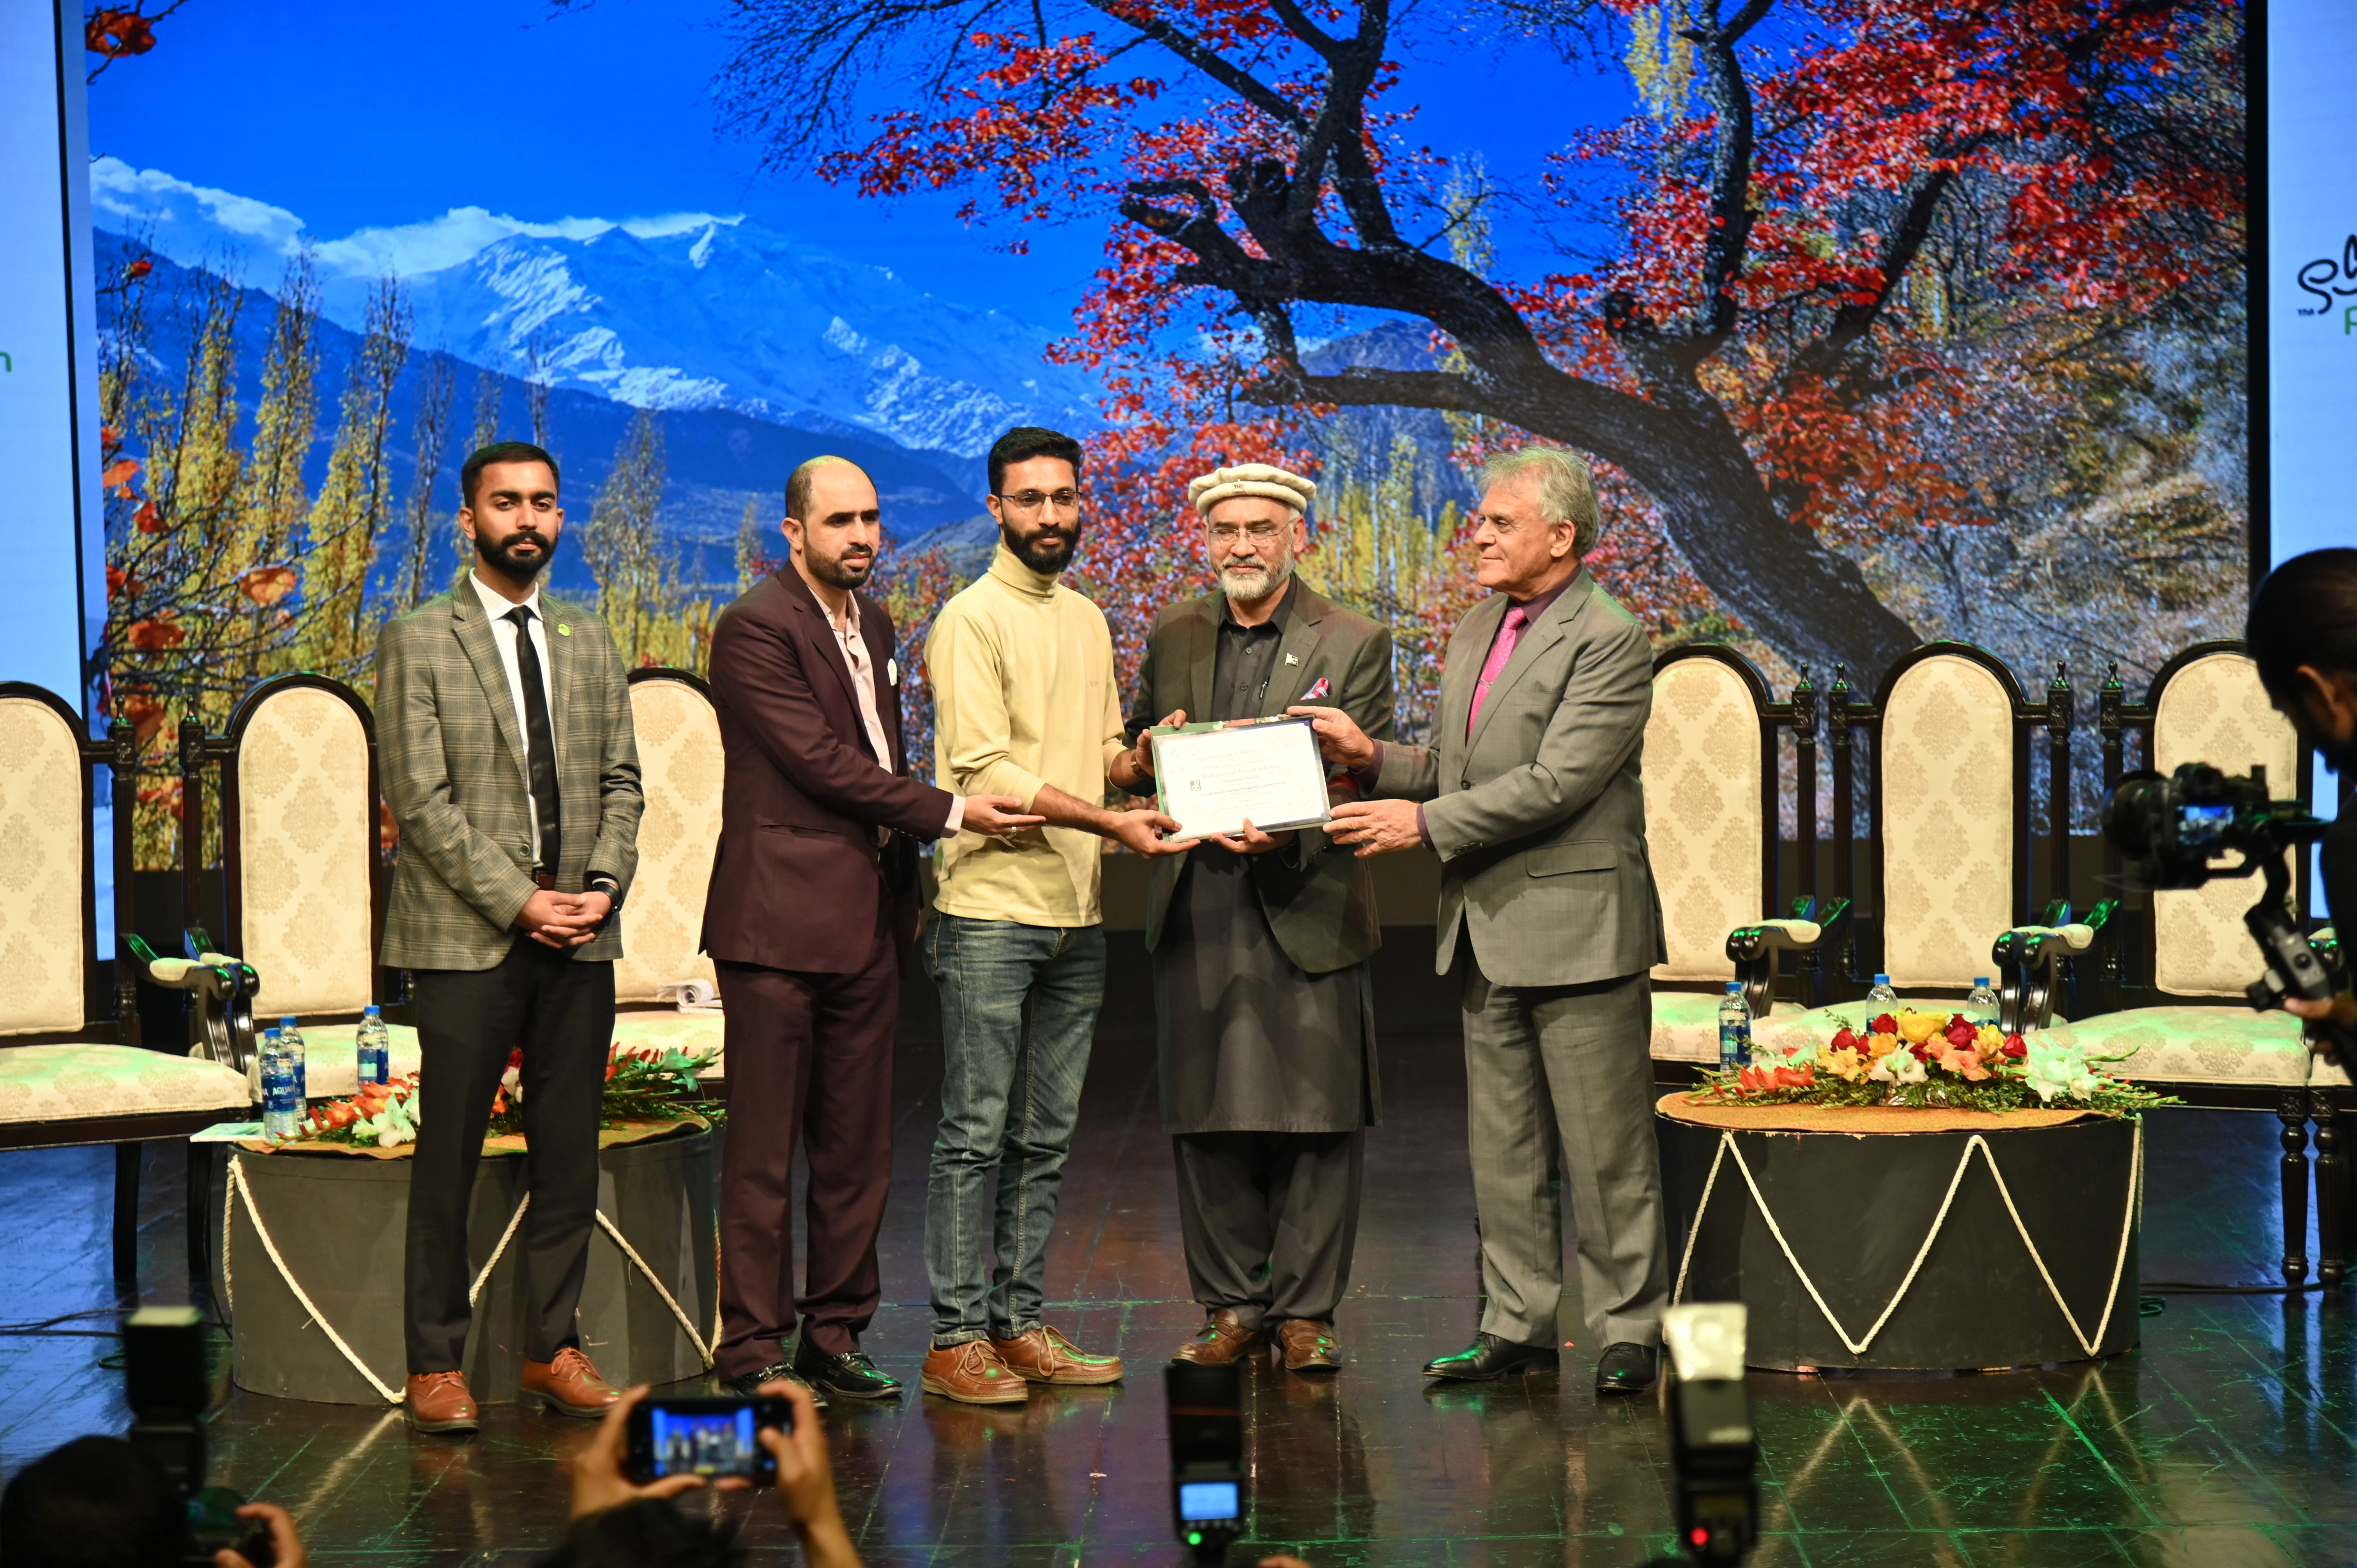 The certificate of acknowledgment presented to Muhammad Umair Ghouri